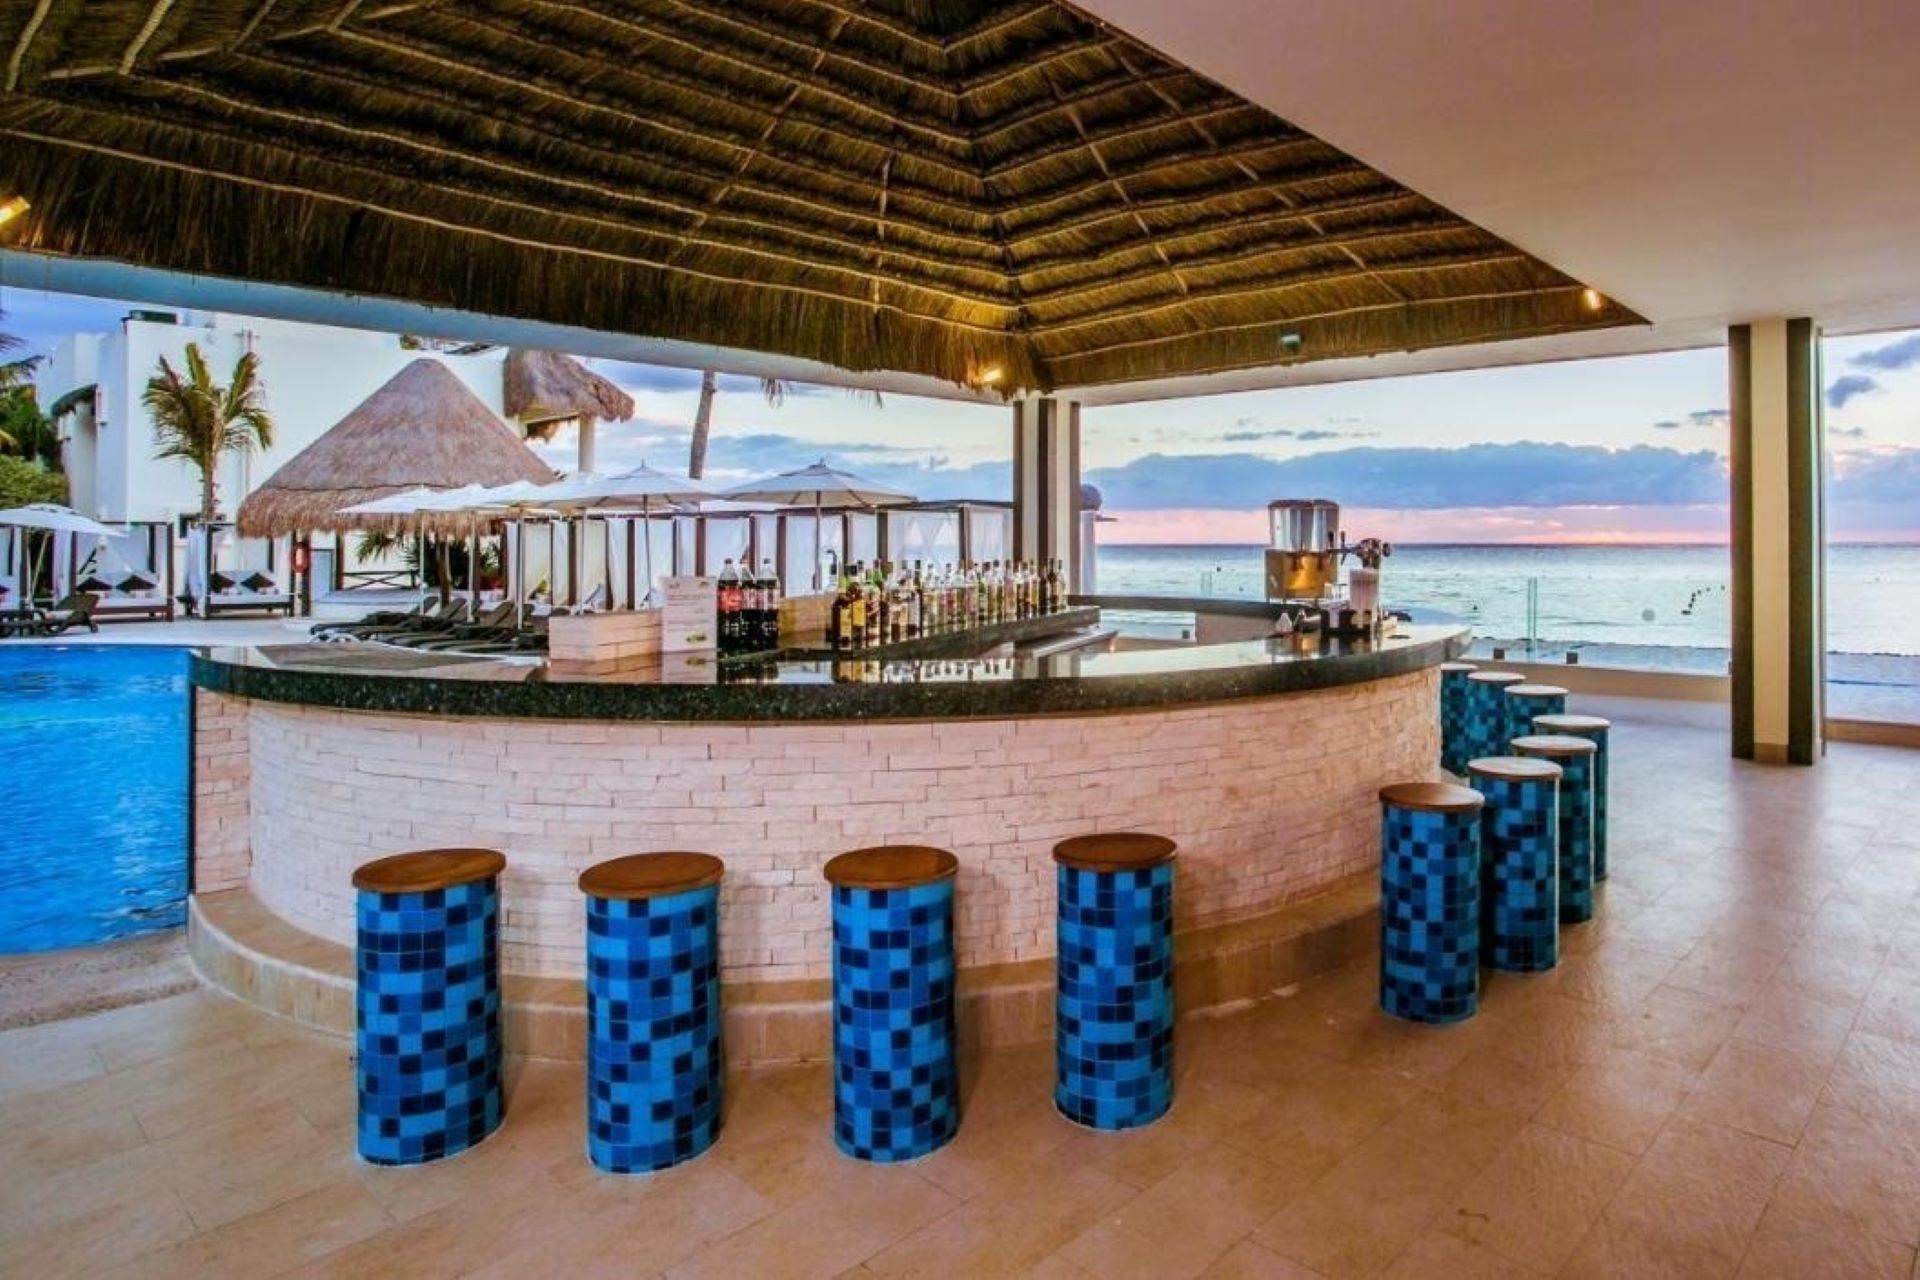 The pool bar at Desire Resort Cancun, the ocean in the background.